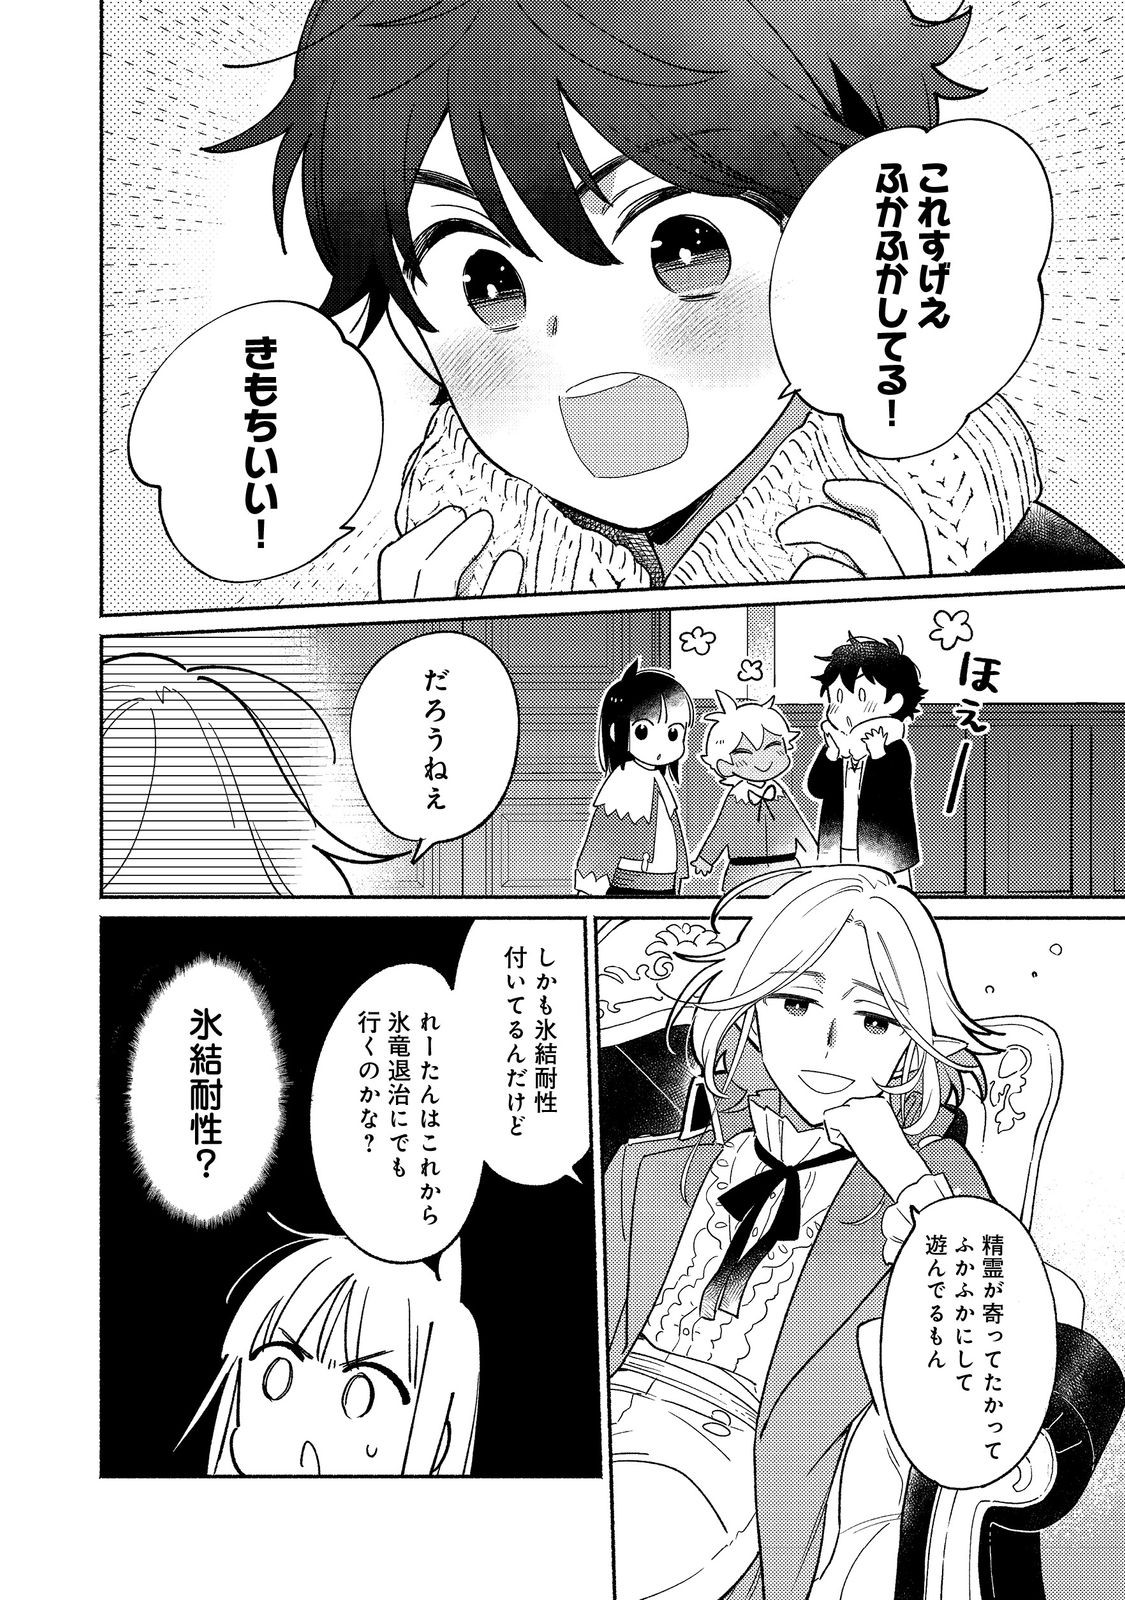 I’m the White Pig Nobleman 第19.1話 - Page 4